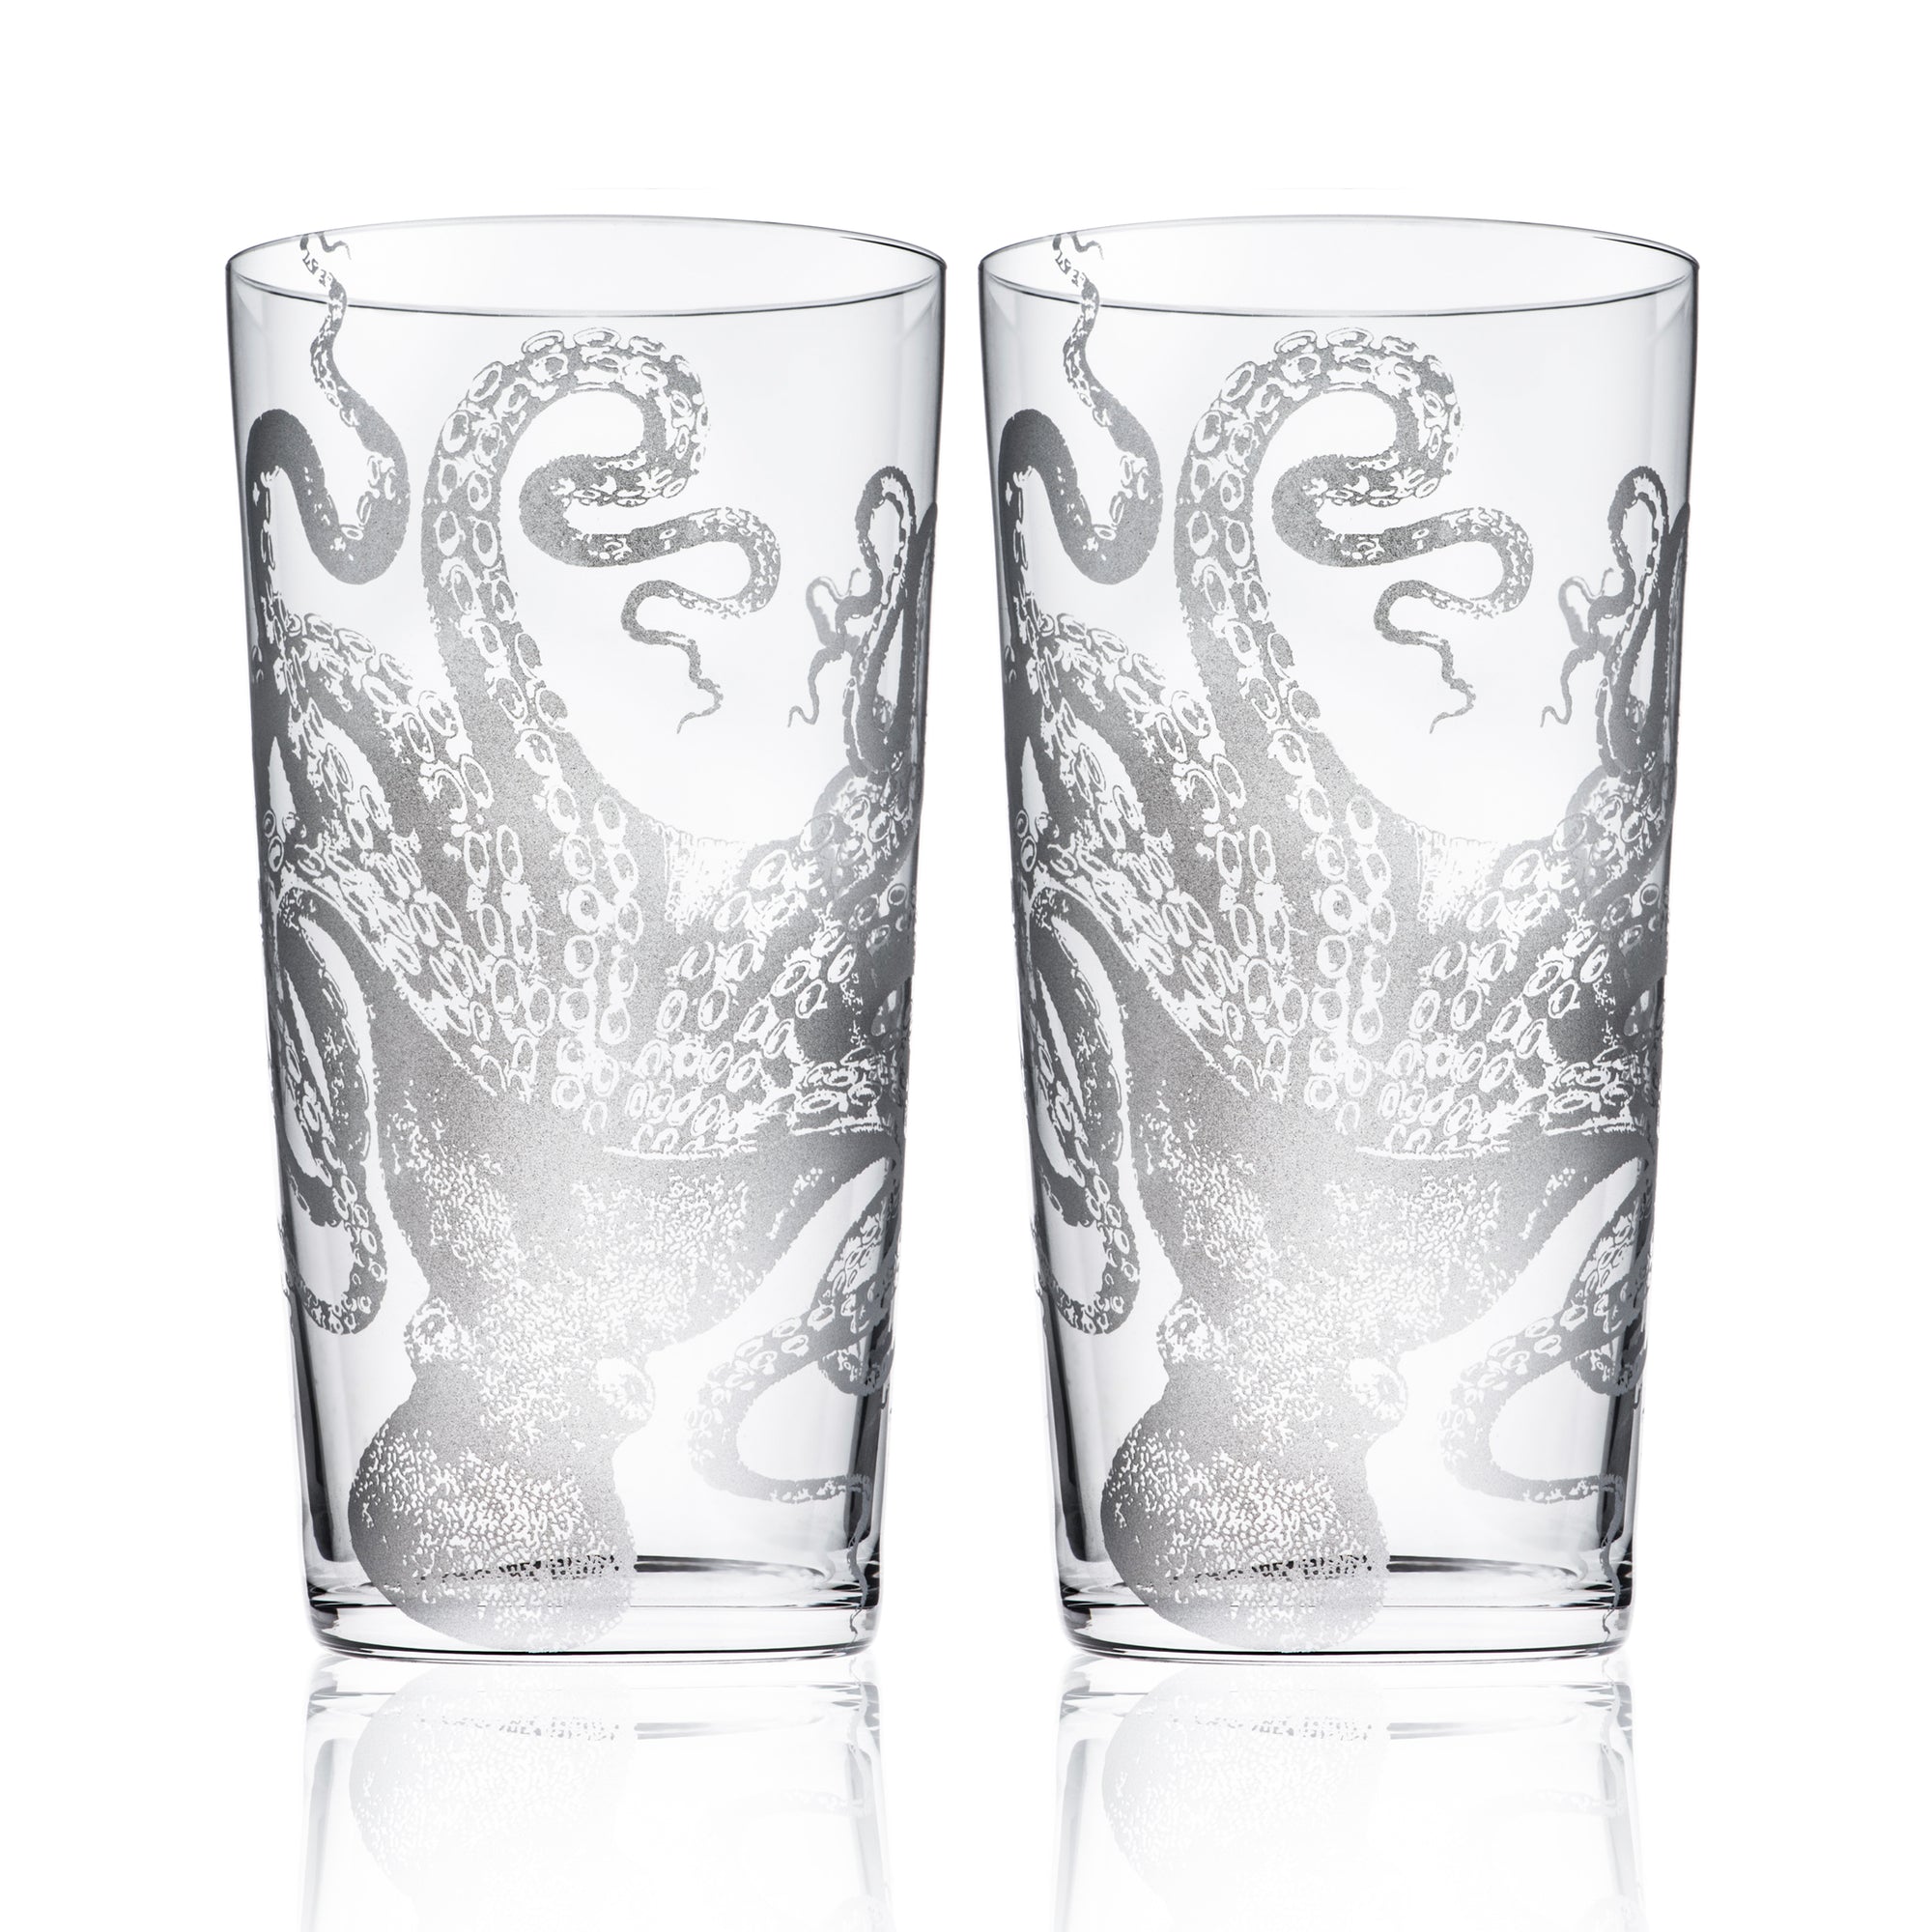 Two clear glasses with octopus tentacle designs.